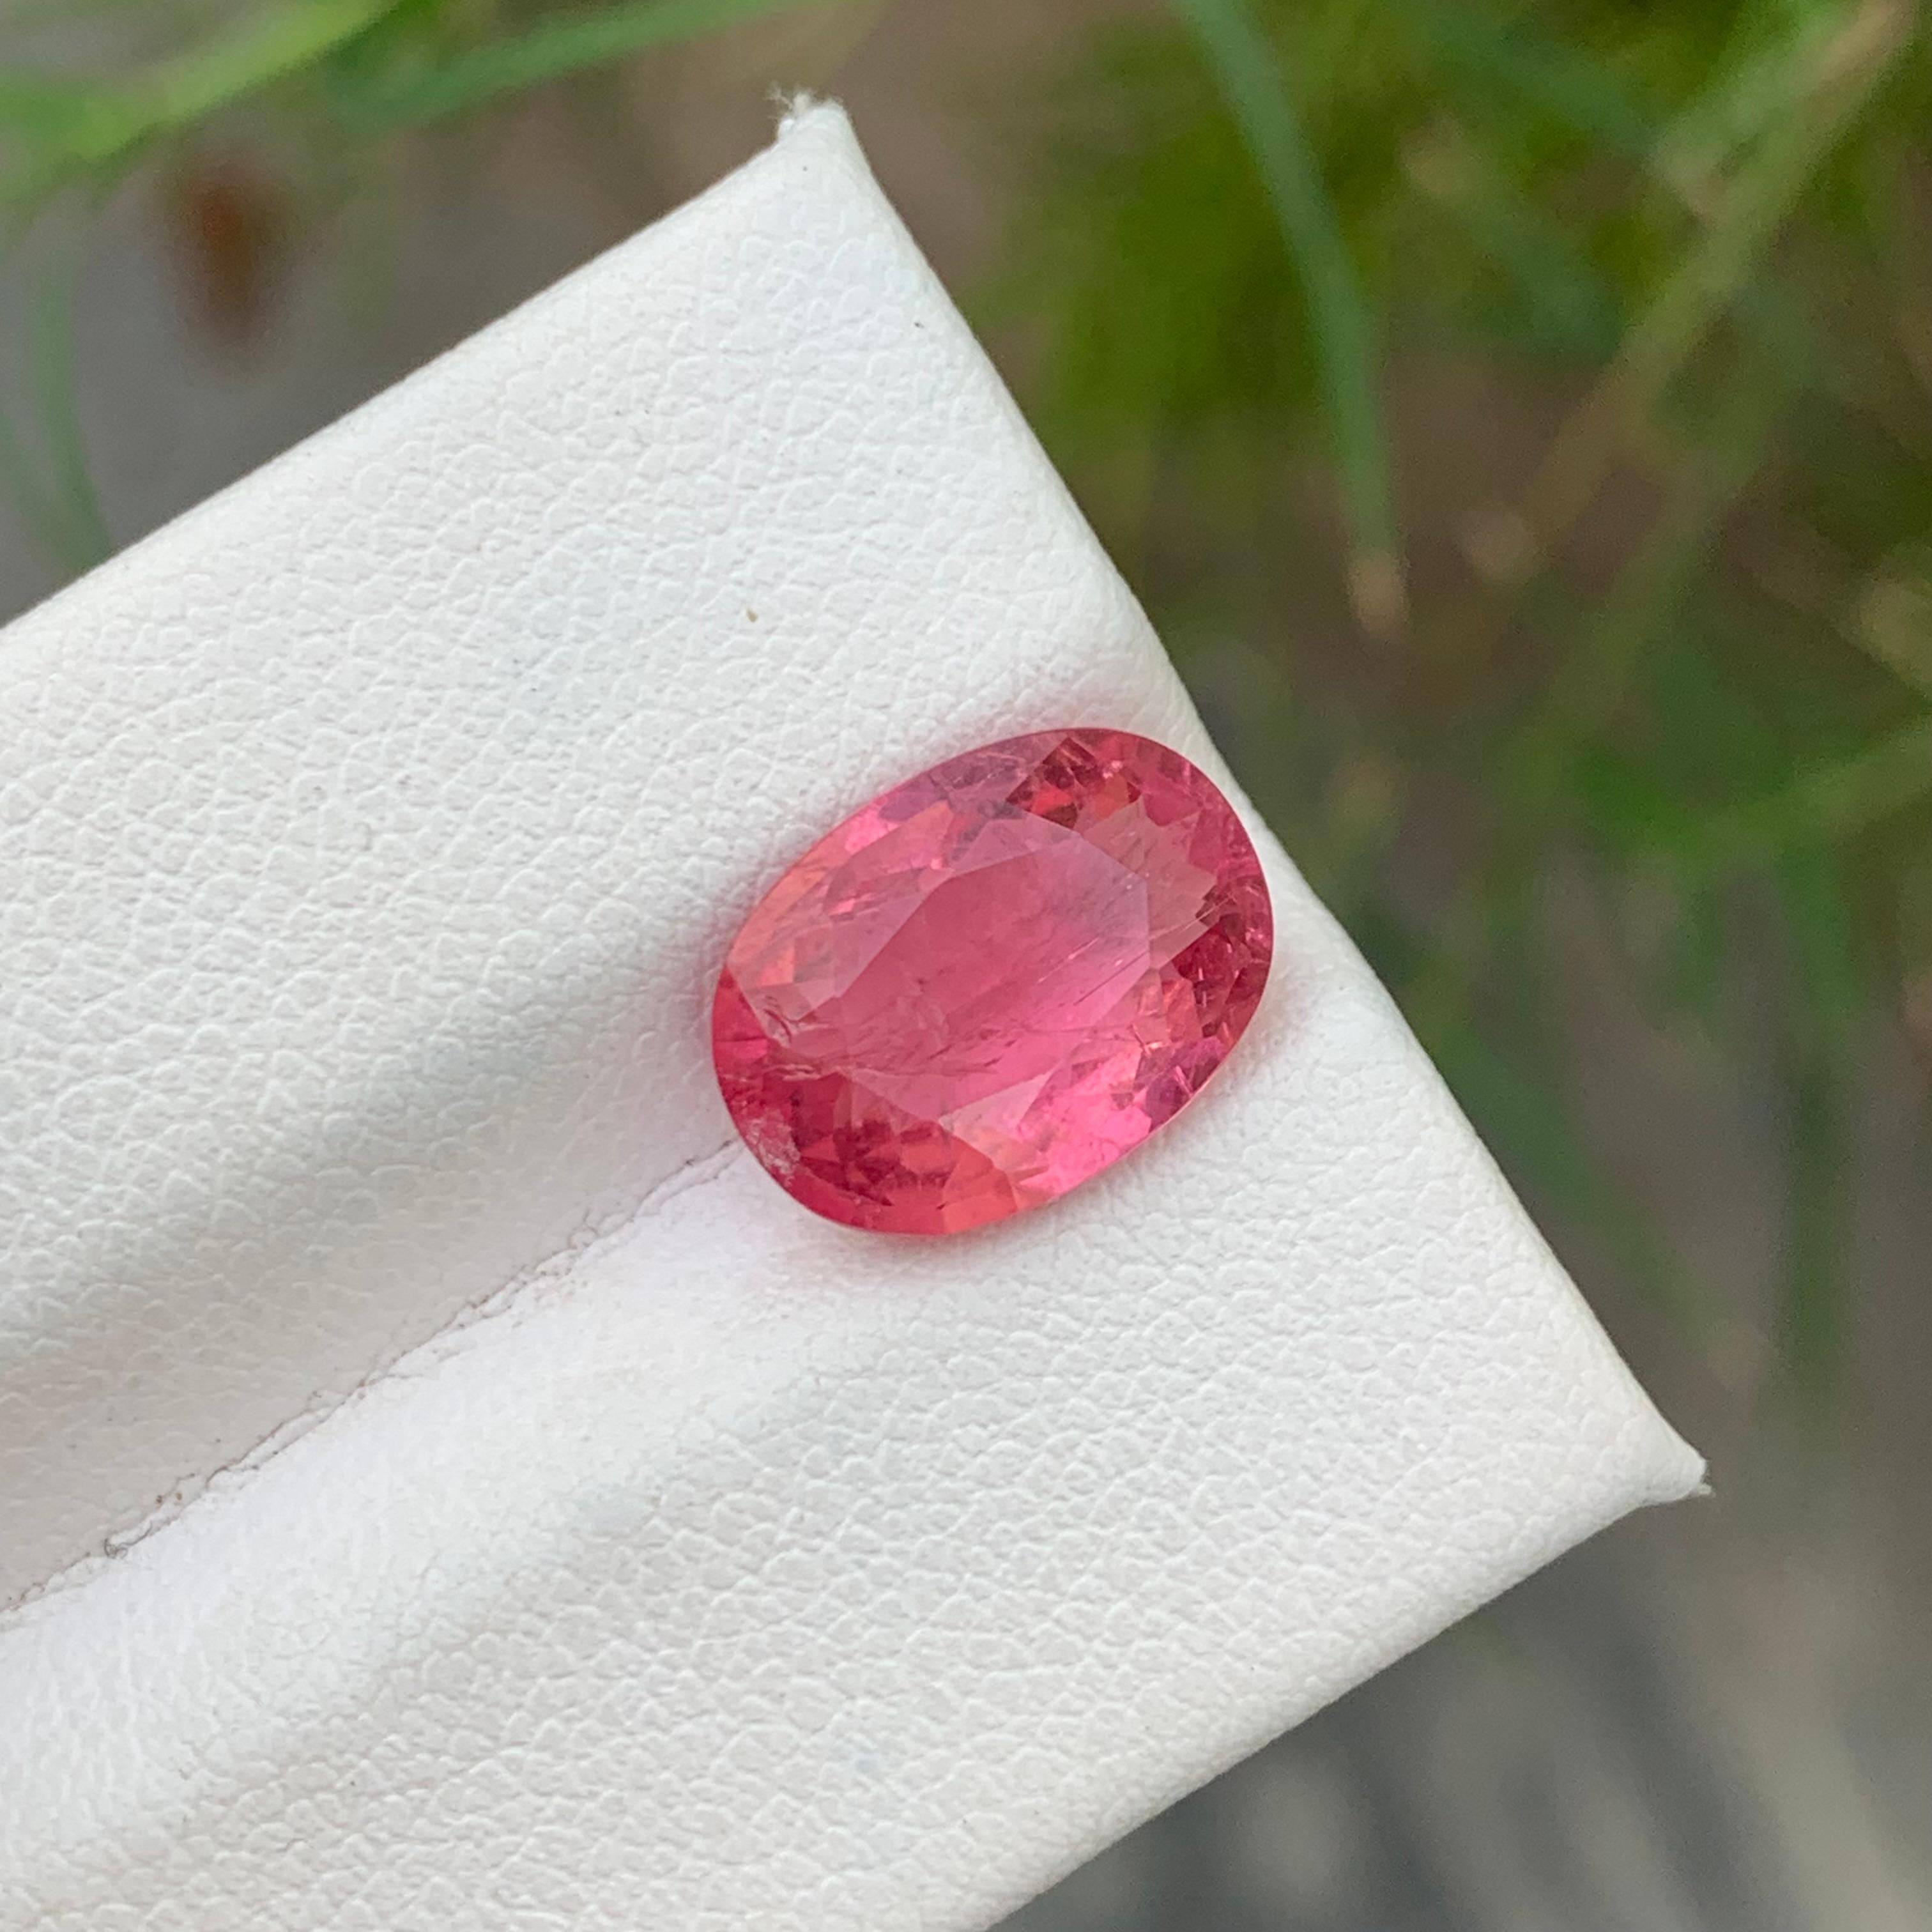 Gemstone Type :  Rubellite Tourmaline
Weight : 3.80 Carats
Dimensions : 12.3x9x4.9 Mm
Origin : Afghanistan
Clarity :  Included
Shape: Oval
Color: Pink
Certificate: On Demand
Rubellites are tourmalines with reasonably saturated dark pink to red